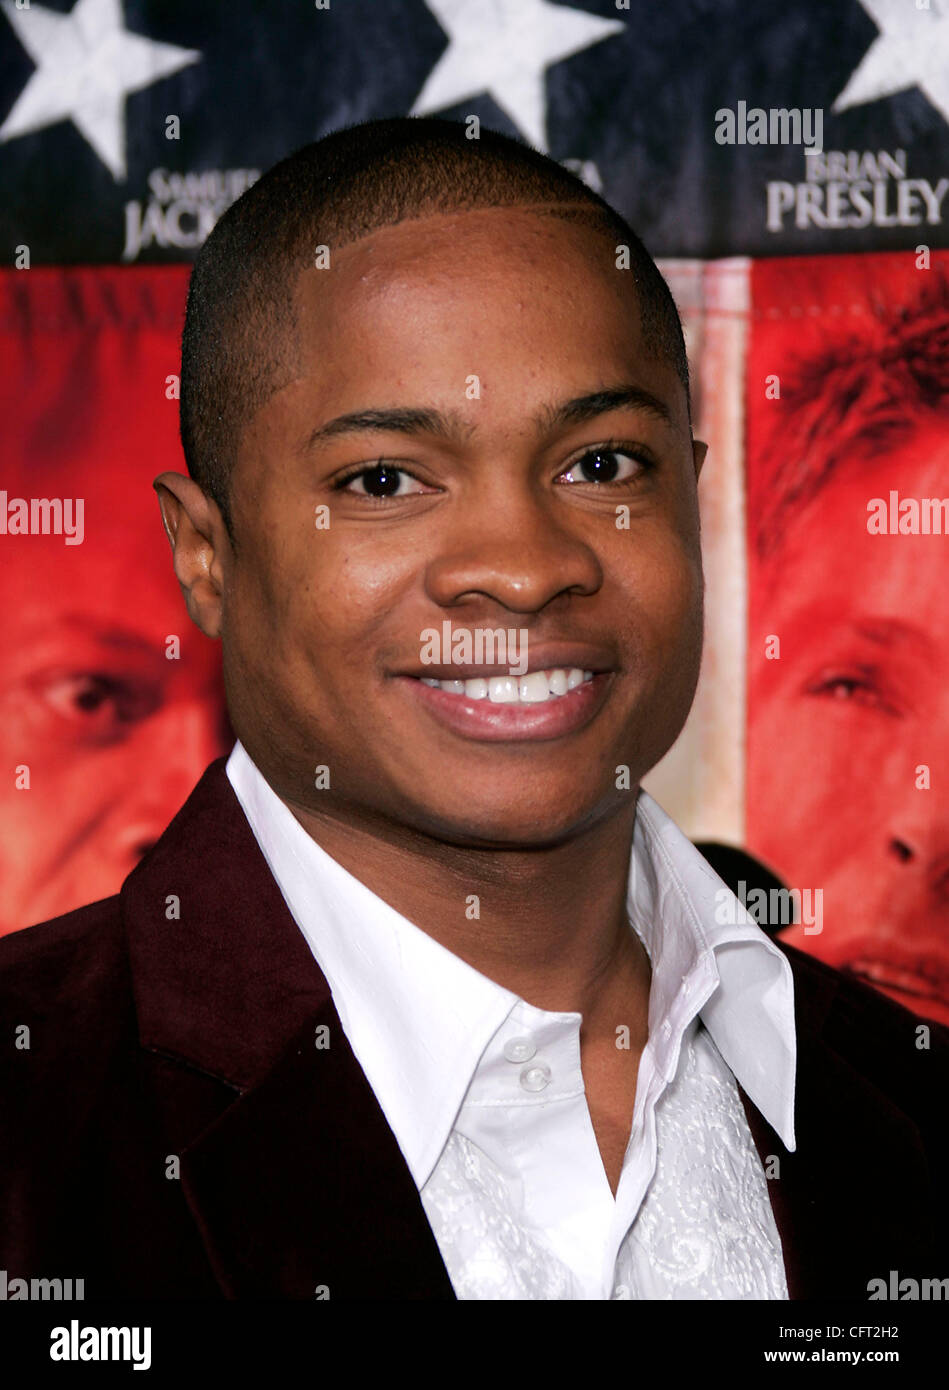 Dec 5, 2006; Beverly Hills, California, USA; Actor SAM JONES III at the 'Home Of The Brave' World Premiere held at the Academy of Motion Pictures & Sciences. Mandatory Credit: Photo by Lisa O'Connor/ZUMA Press. (©) Copyright 2006 by Lisa O'Connor Stock Photo